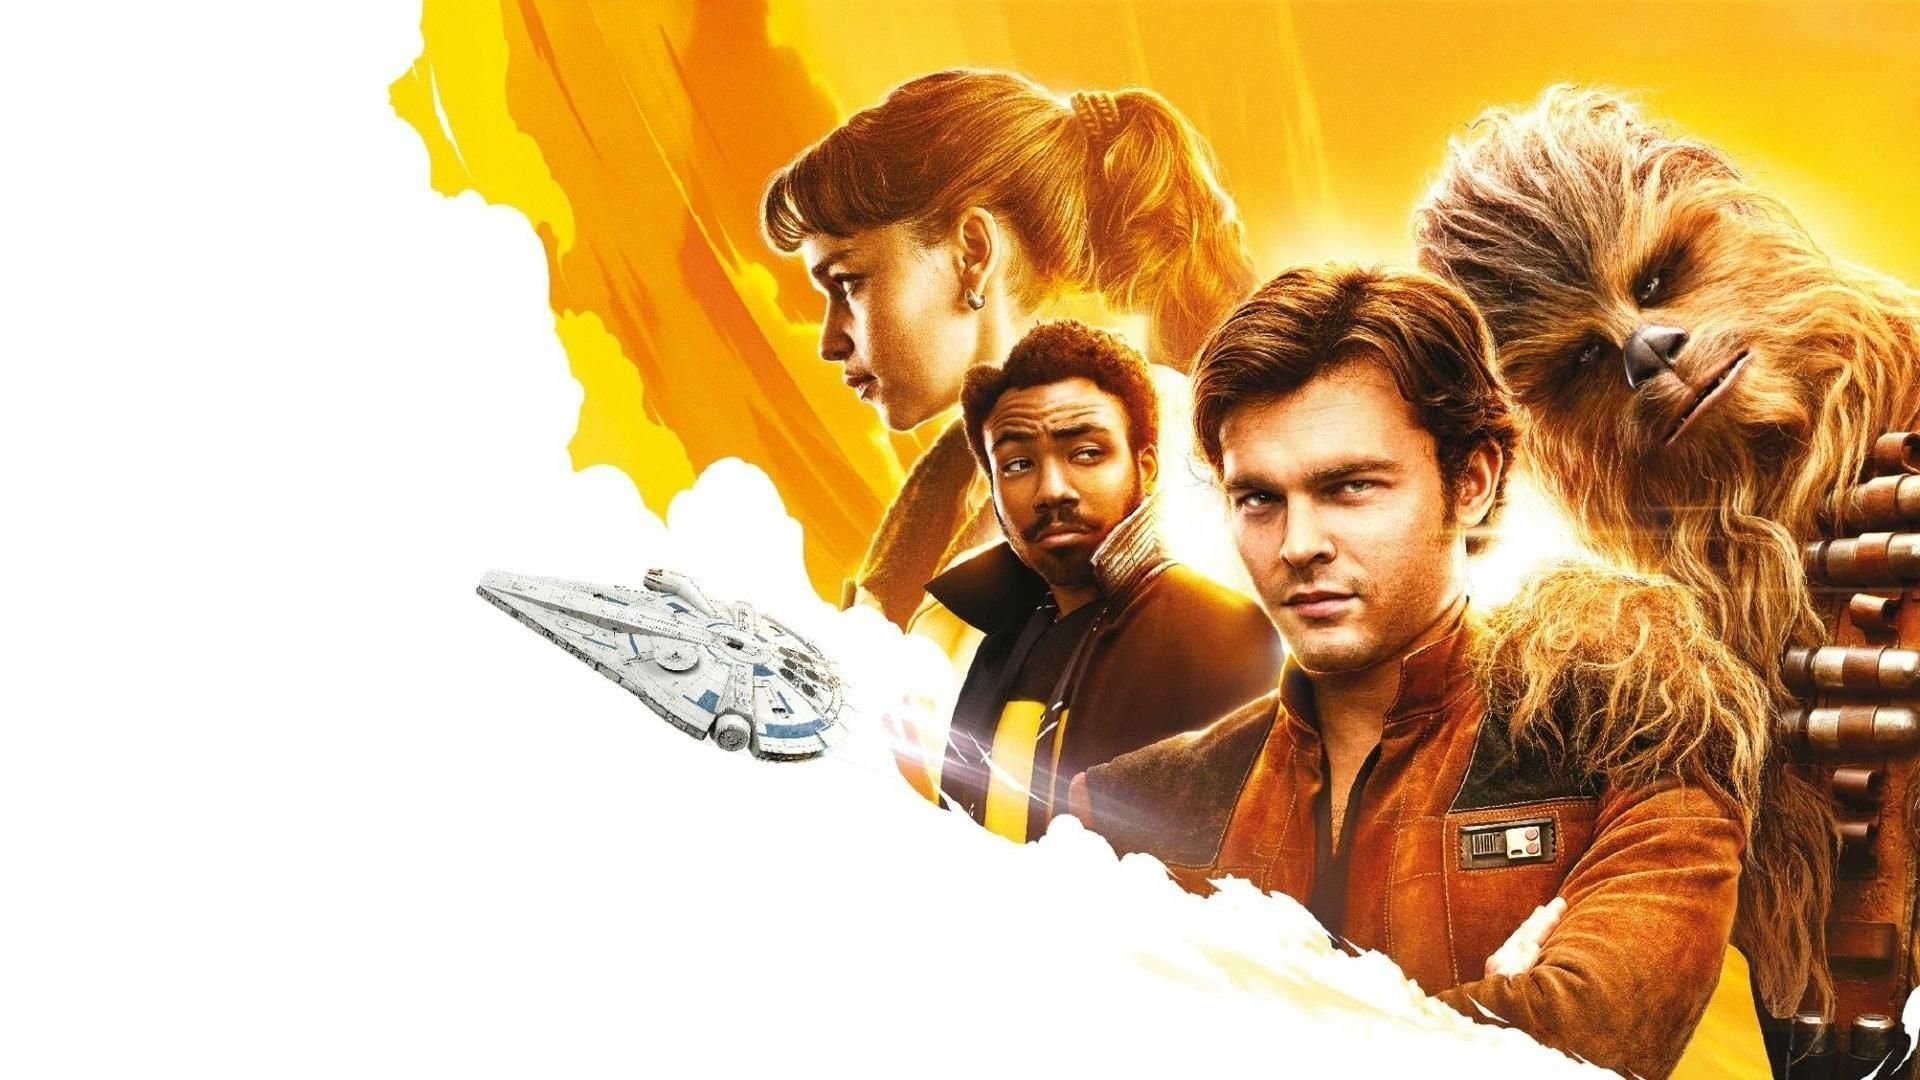 Image result for solo a star wars story